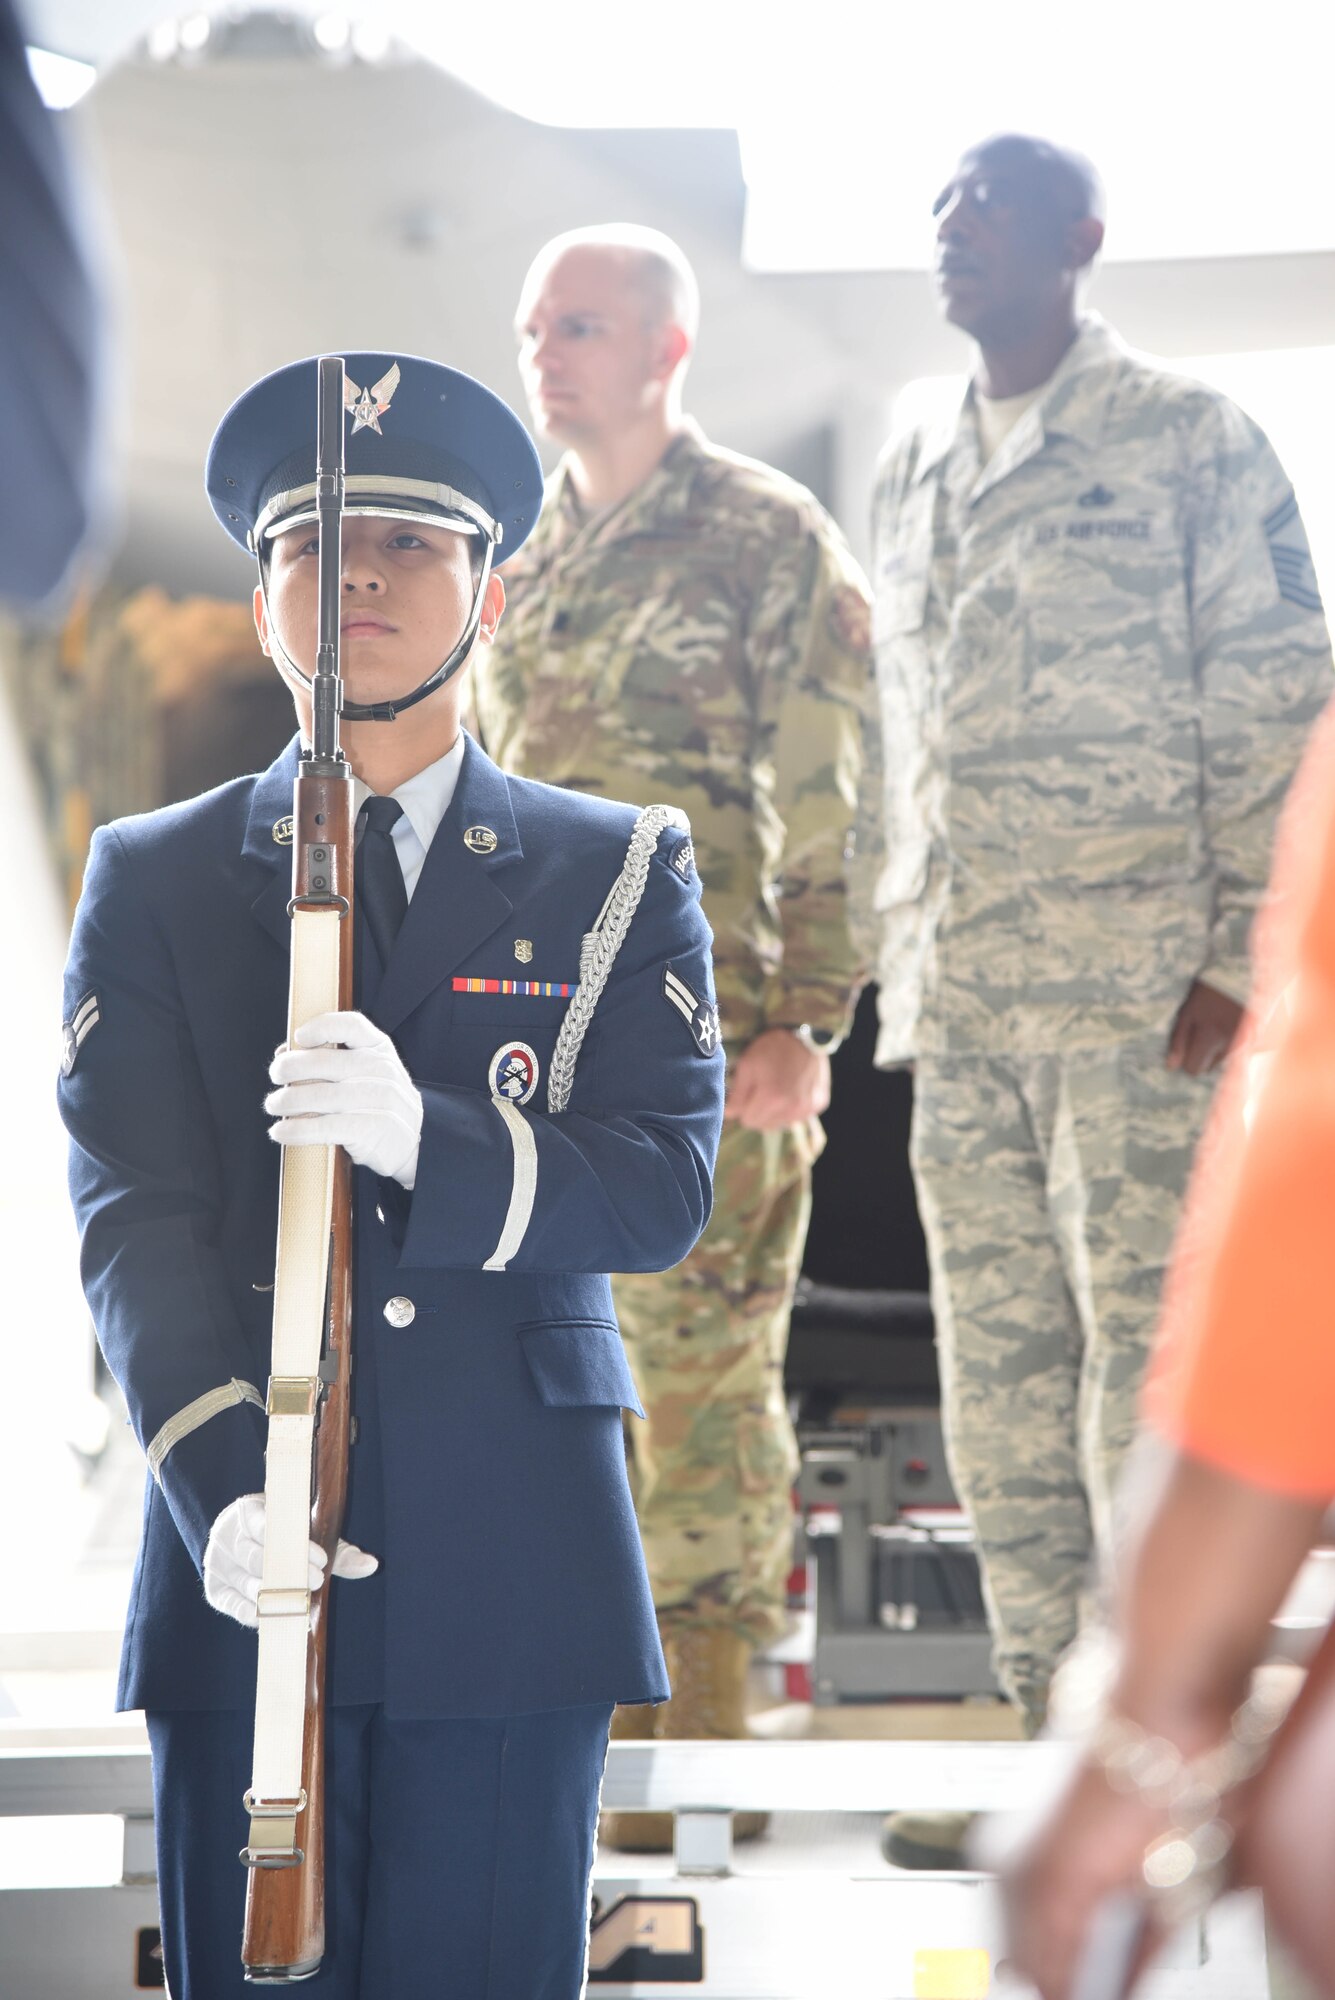 A member of the Keesler Air Force Base, Mississippi, Honor Guard stands at attention during the National Anthem as part of a retirement ceremony honoring Senior Master Sgt. Charles Moore March 8, 2019.  Moore retires from his duties as a production superintendent with the 803rd Aircraft  Maintenance Squadron April 1, 2019. He served 33-years in the Air Force Reserve. (U.S. Air Force photo by Tech. Sgt. Michael Farrar)